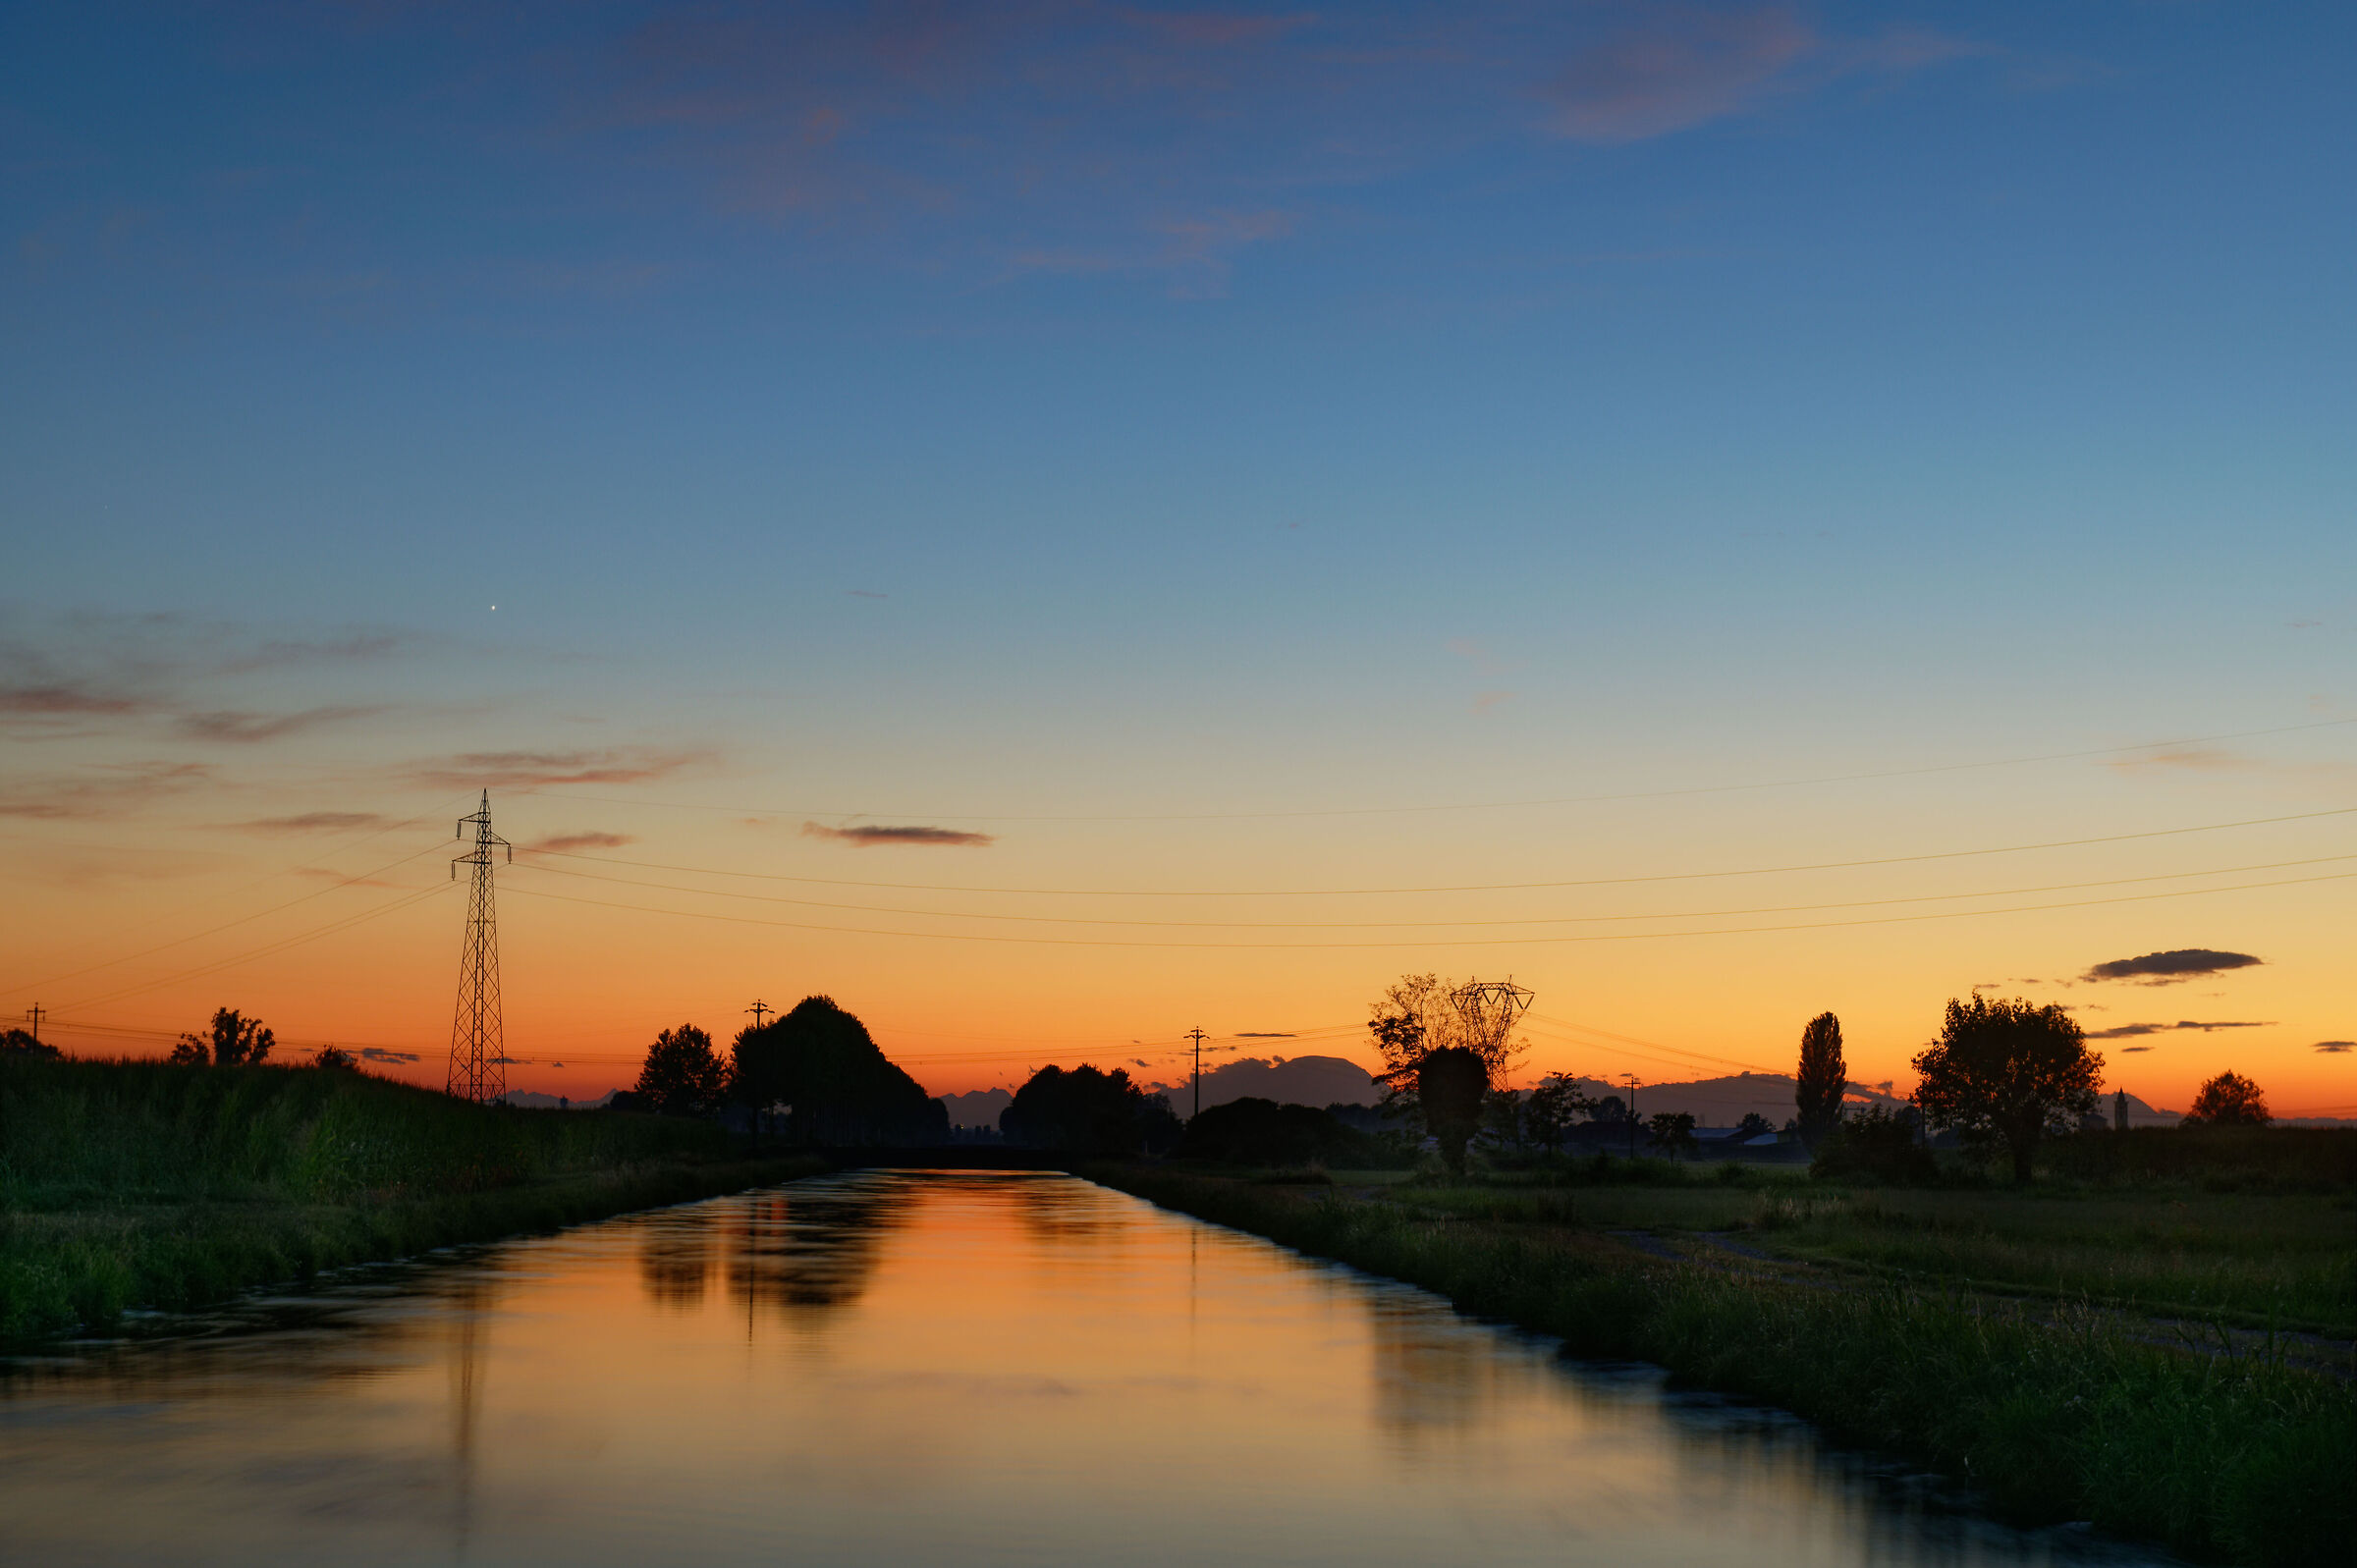 A sunset over the canal....